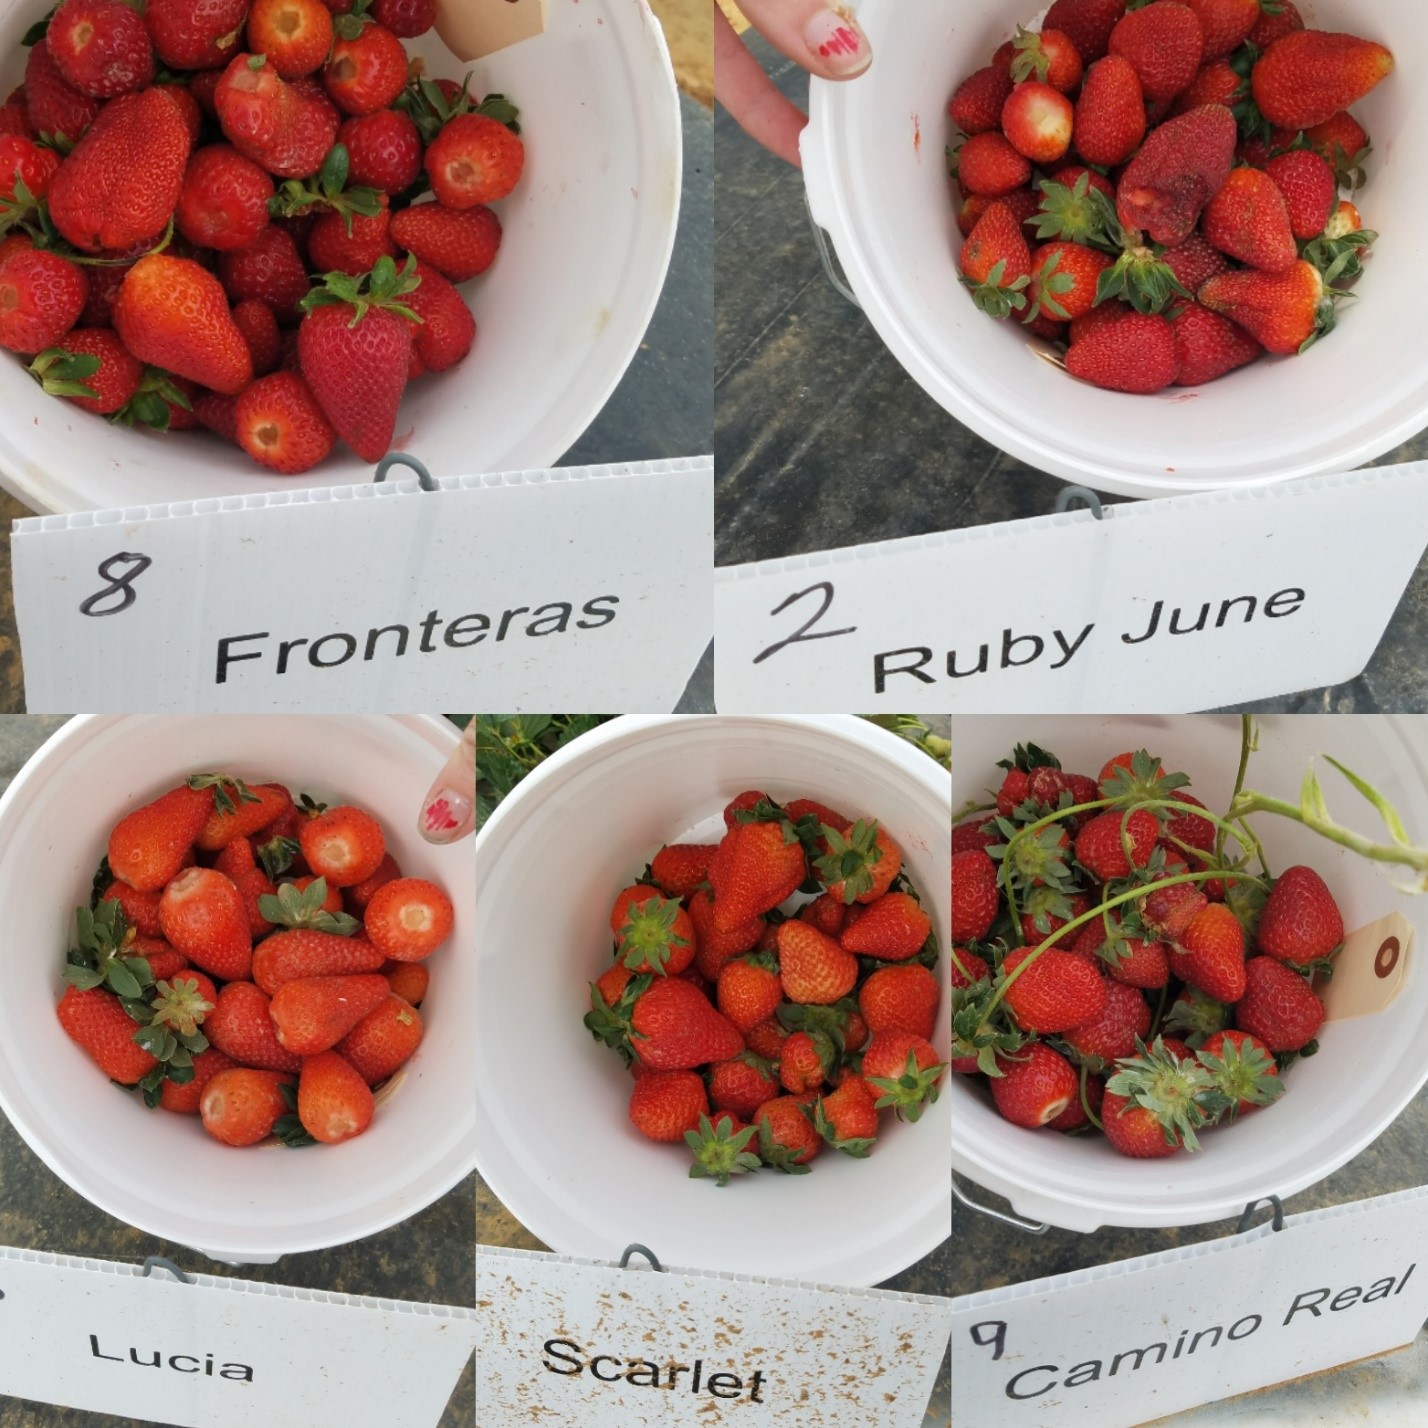 Comparison of Variety Berry Size and Shape